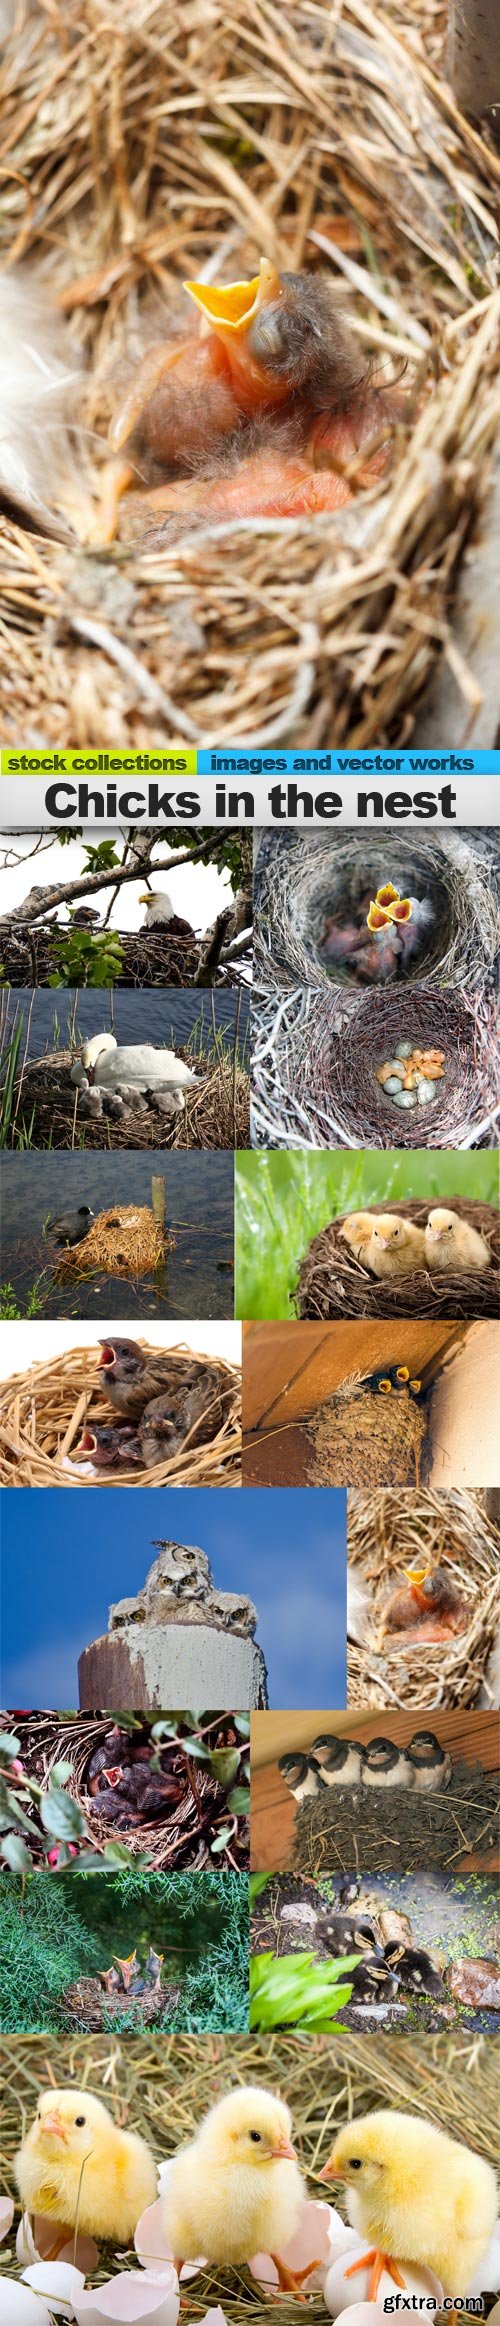 Chicks in the nest, 15 x UHQ JPEG